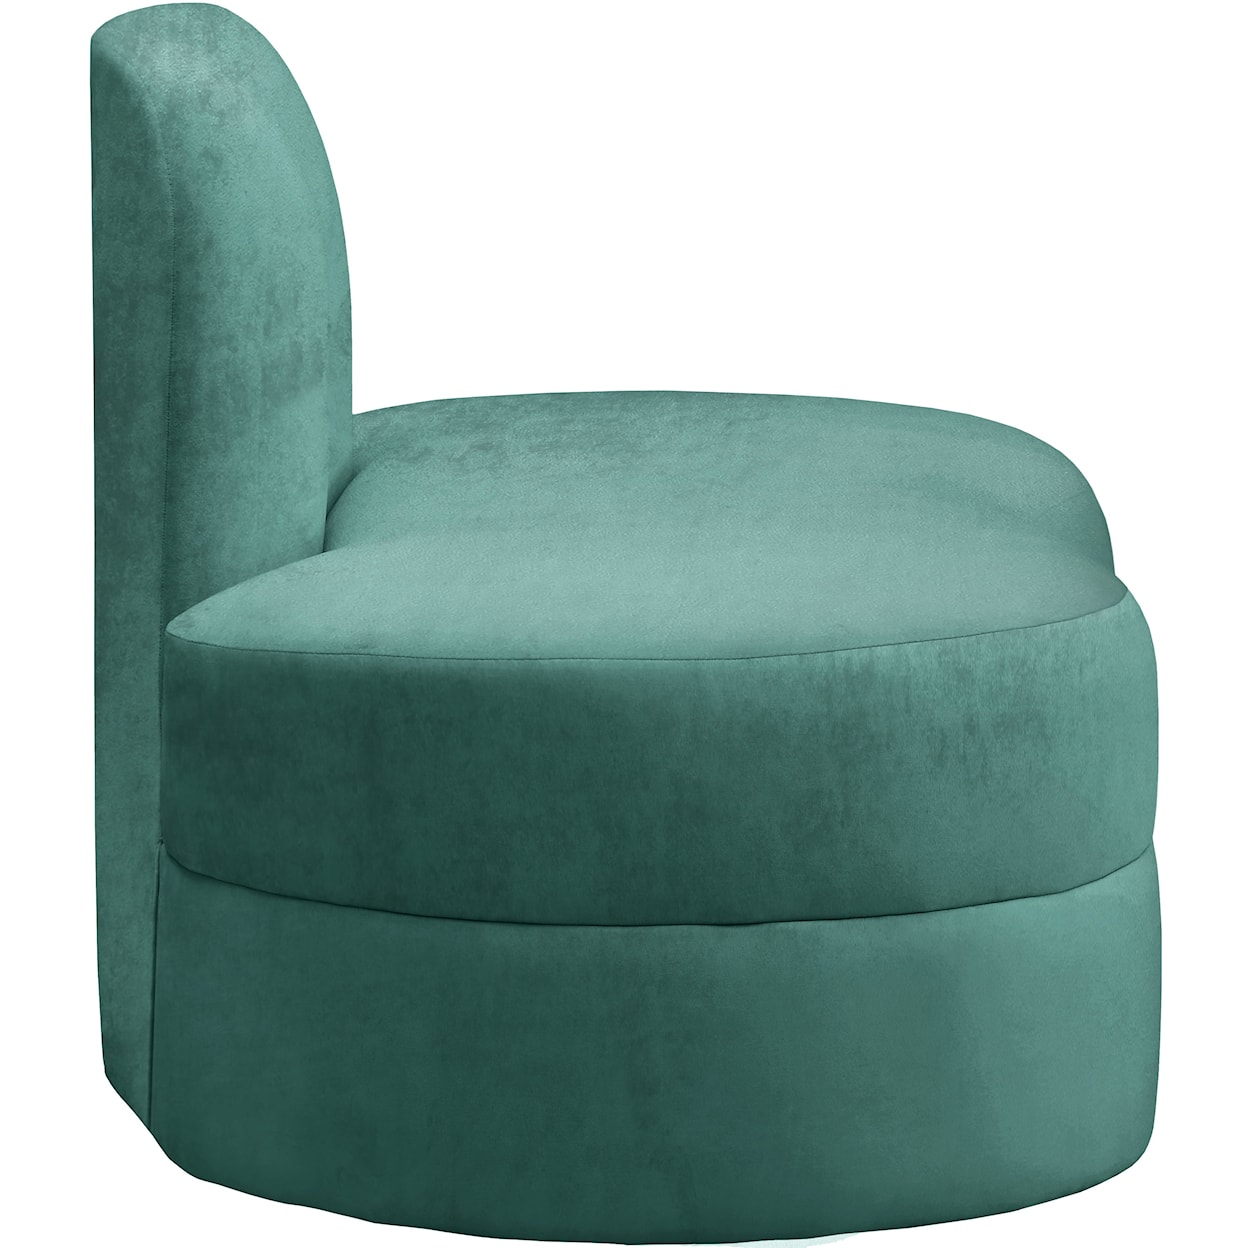 Meridian Furniture Mitzy Chair